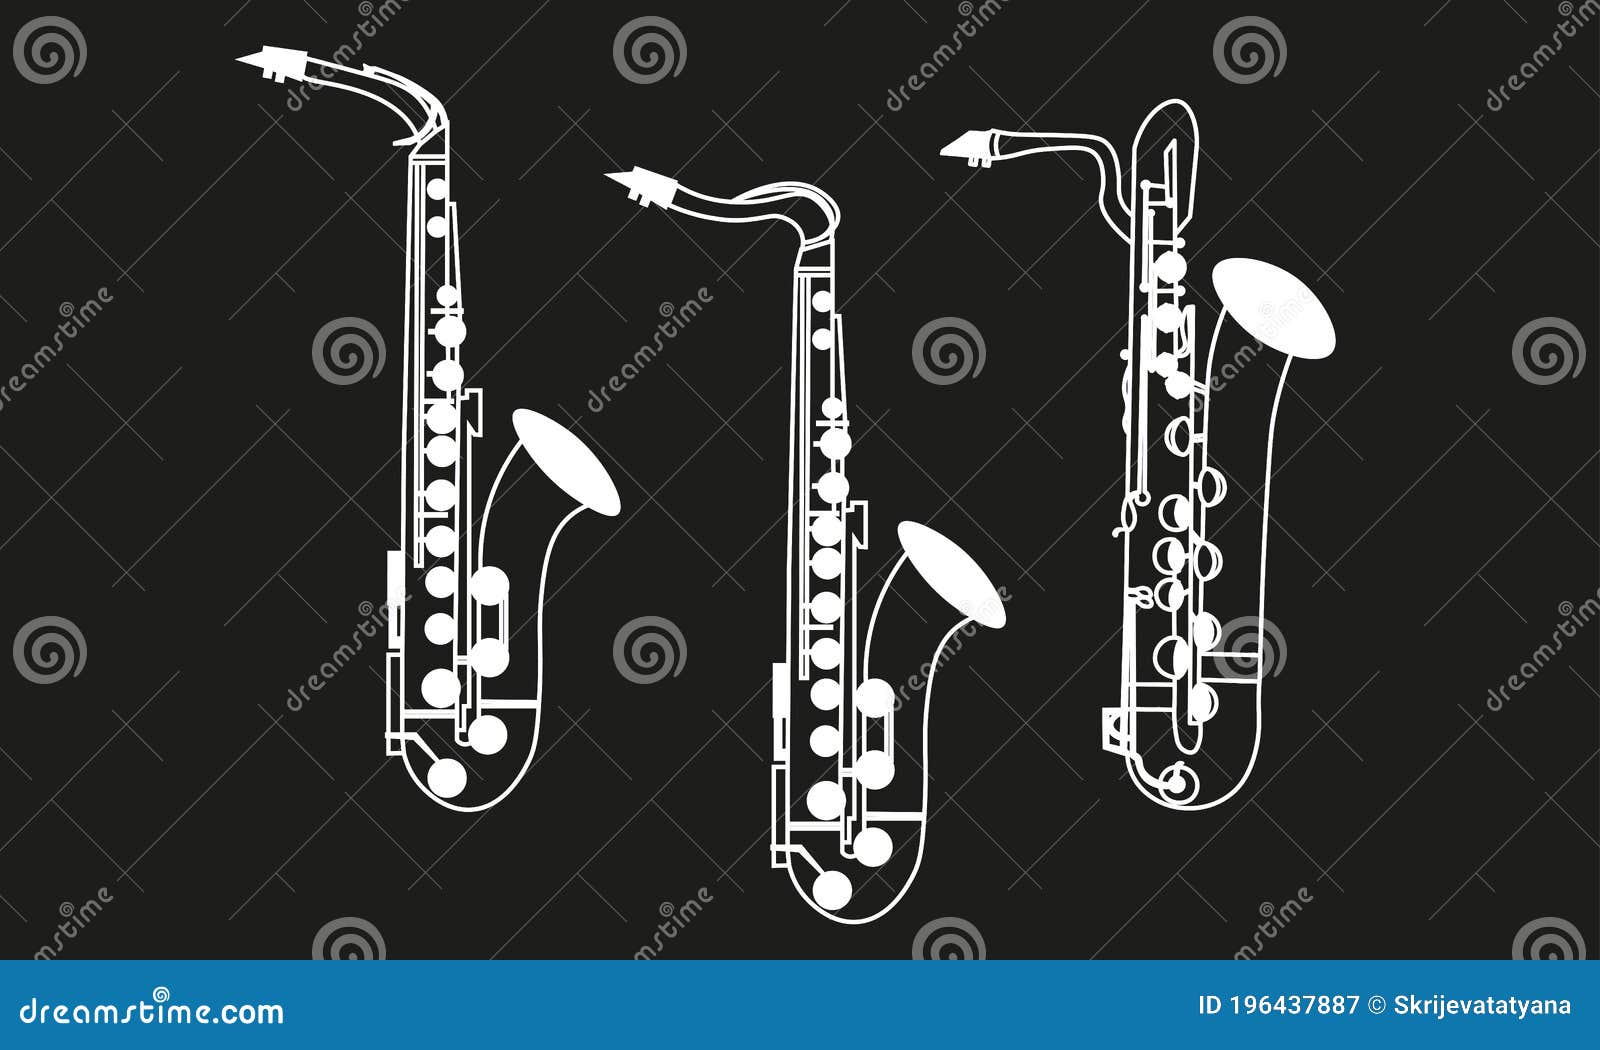 white color line drawings of outline alto saxophone, tenor saxophone and baritone saxophone musical instrument contour